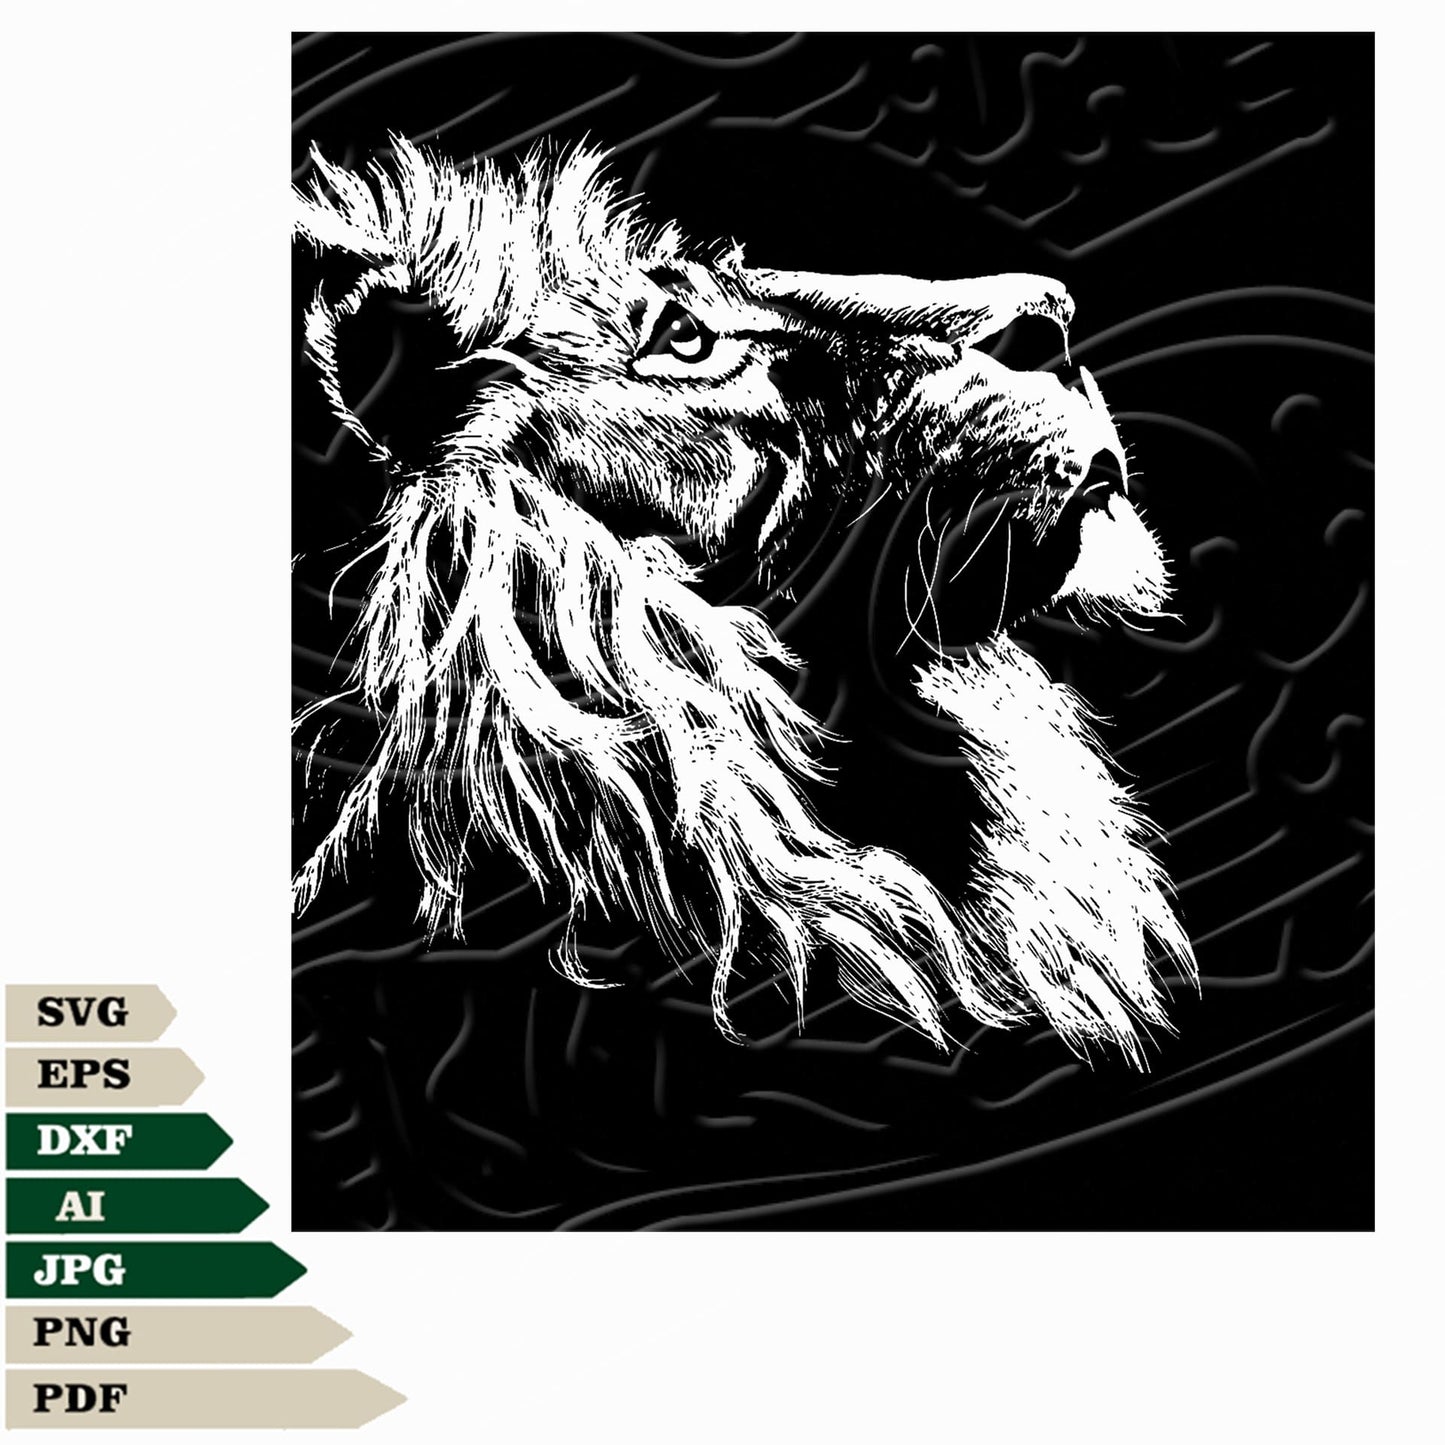 This Lion Svg File Includes A Graphic Of A Lion King Svg Design With A Lion Head Png. It Can Be Used For Animals Svg File, Lion Vector Graphics, Lion Head Svg For Tattoo, And Lion King Svg For Cricut. All High-Quality Features.